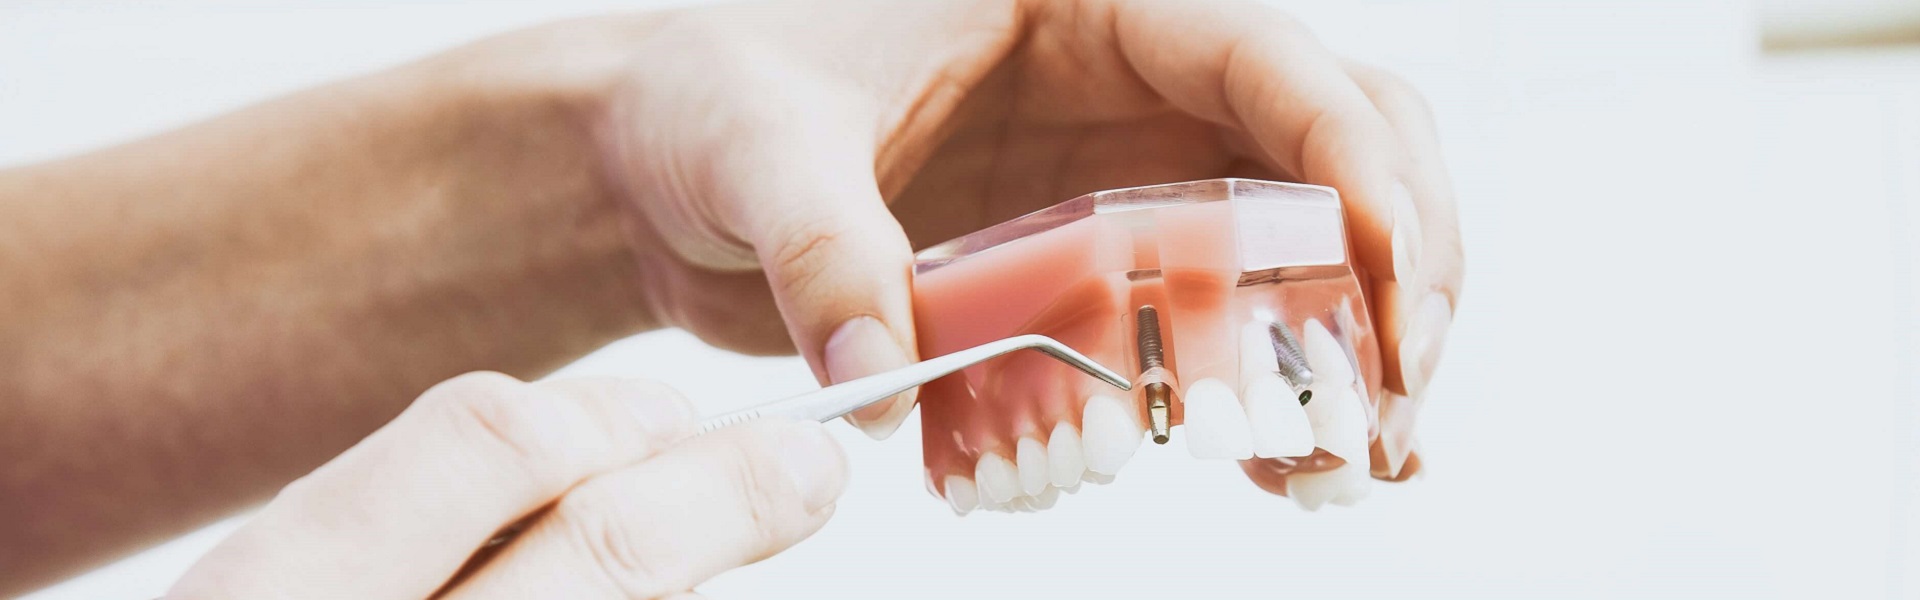 Physical therapy | Dental implants Belgrade